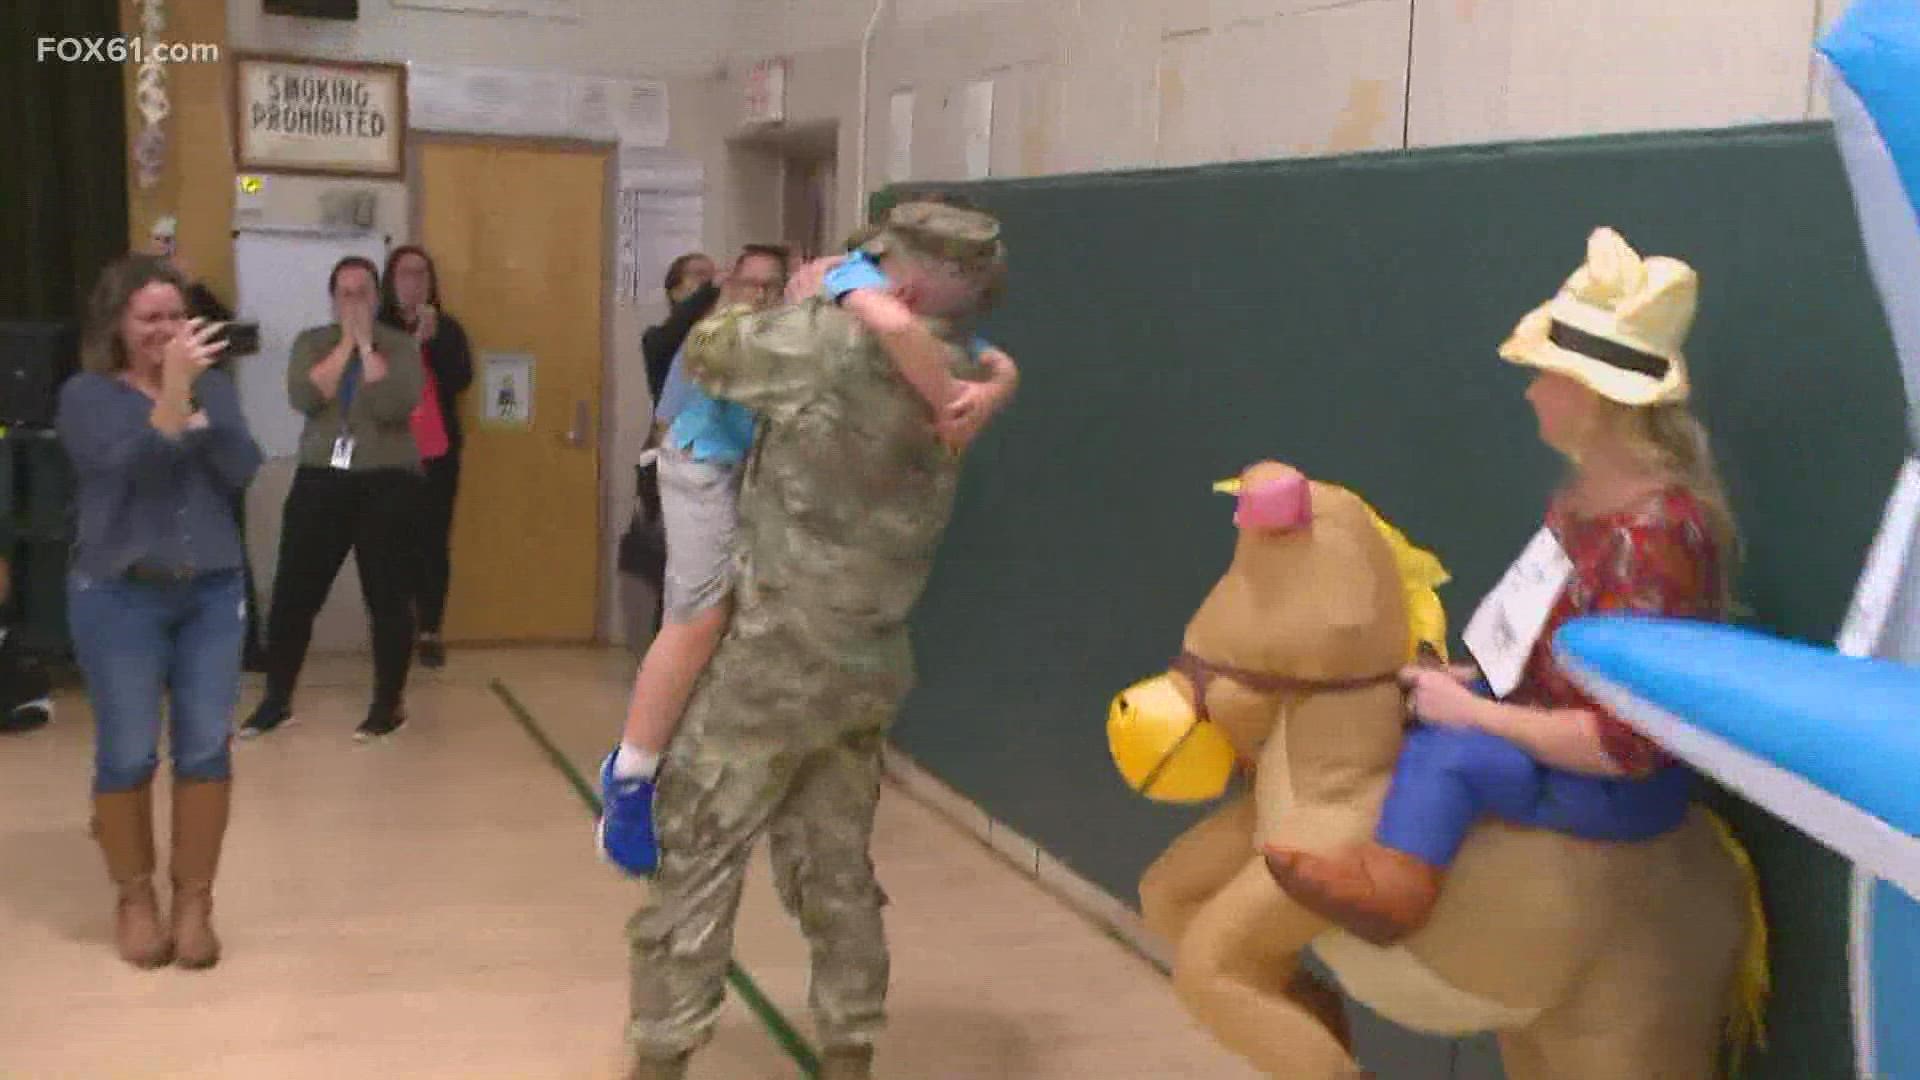 The father was stationed in Poland and was able to see his son after a year of being away.